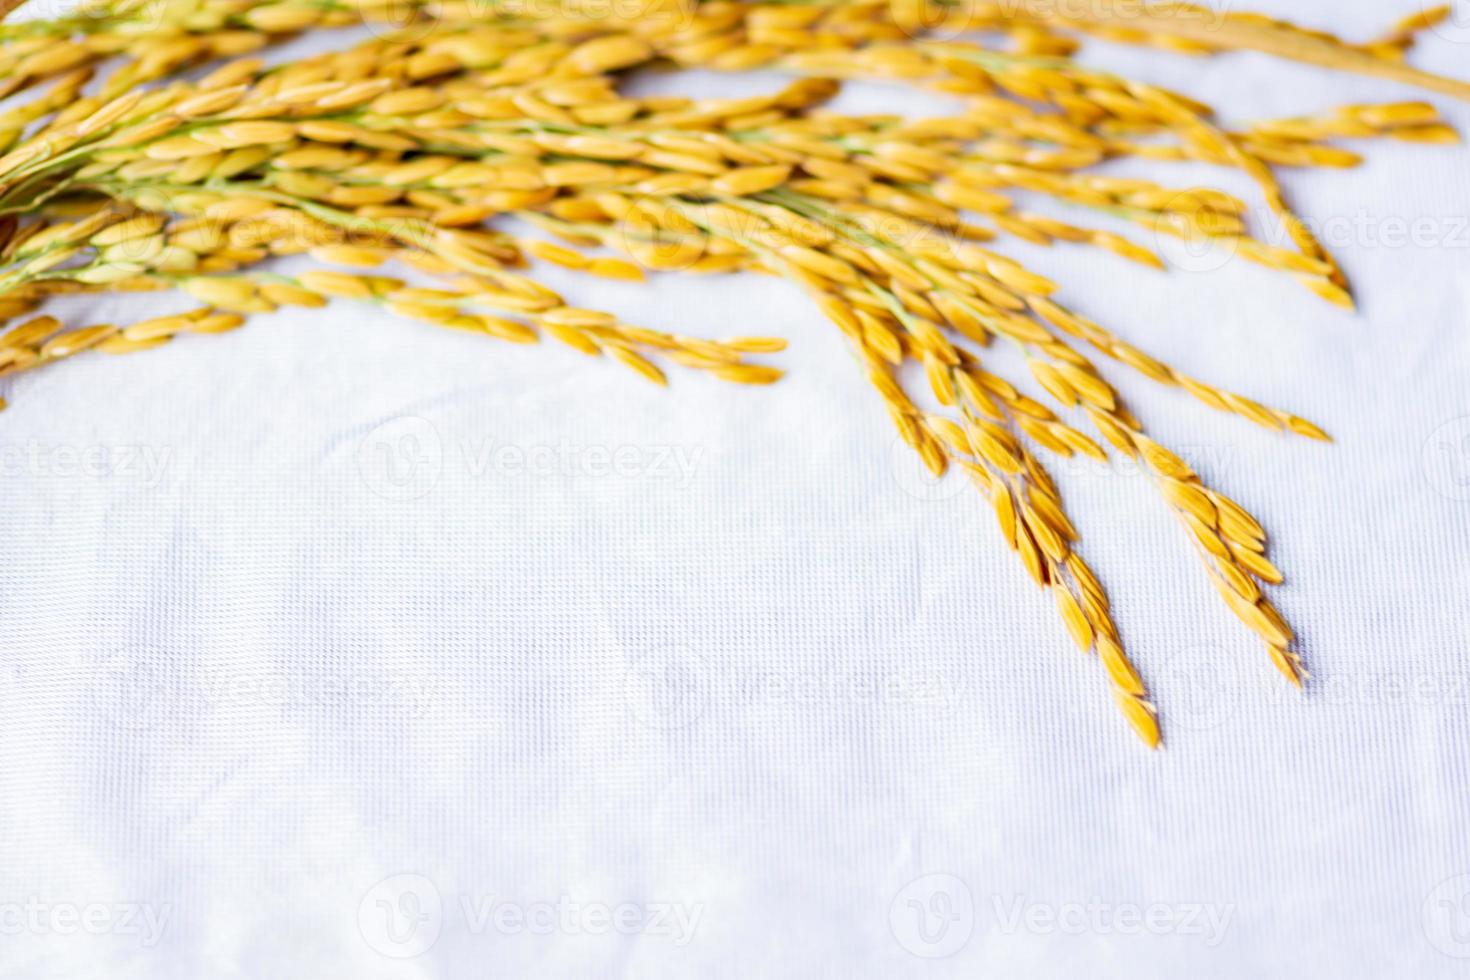 The rice seed placed on the white cloth. photo